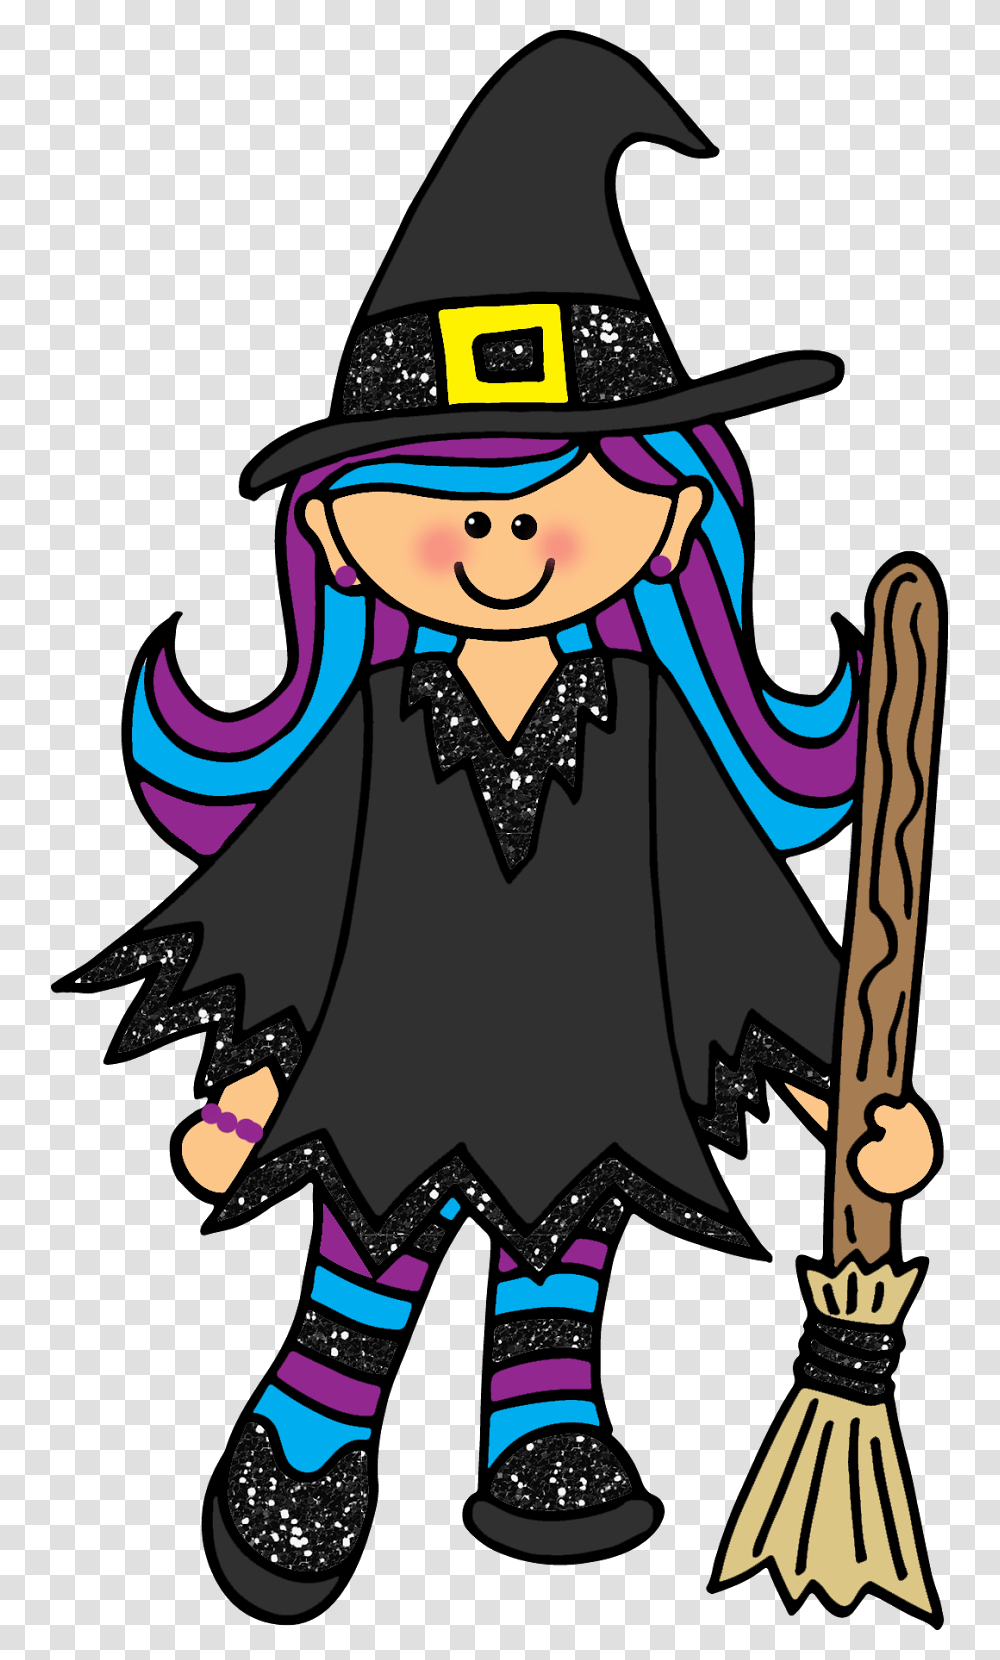 The friendly witch